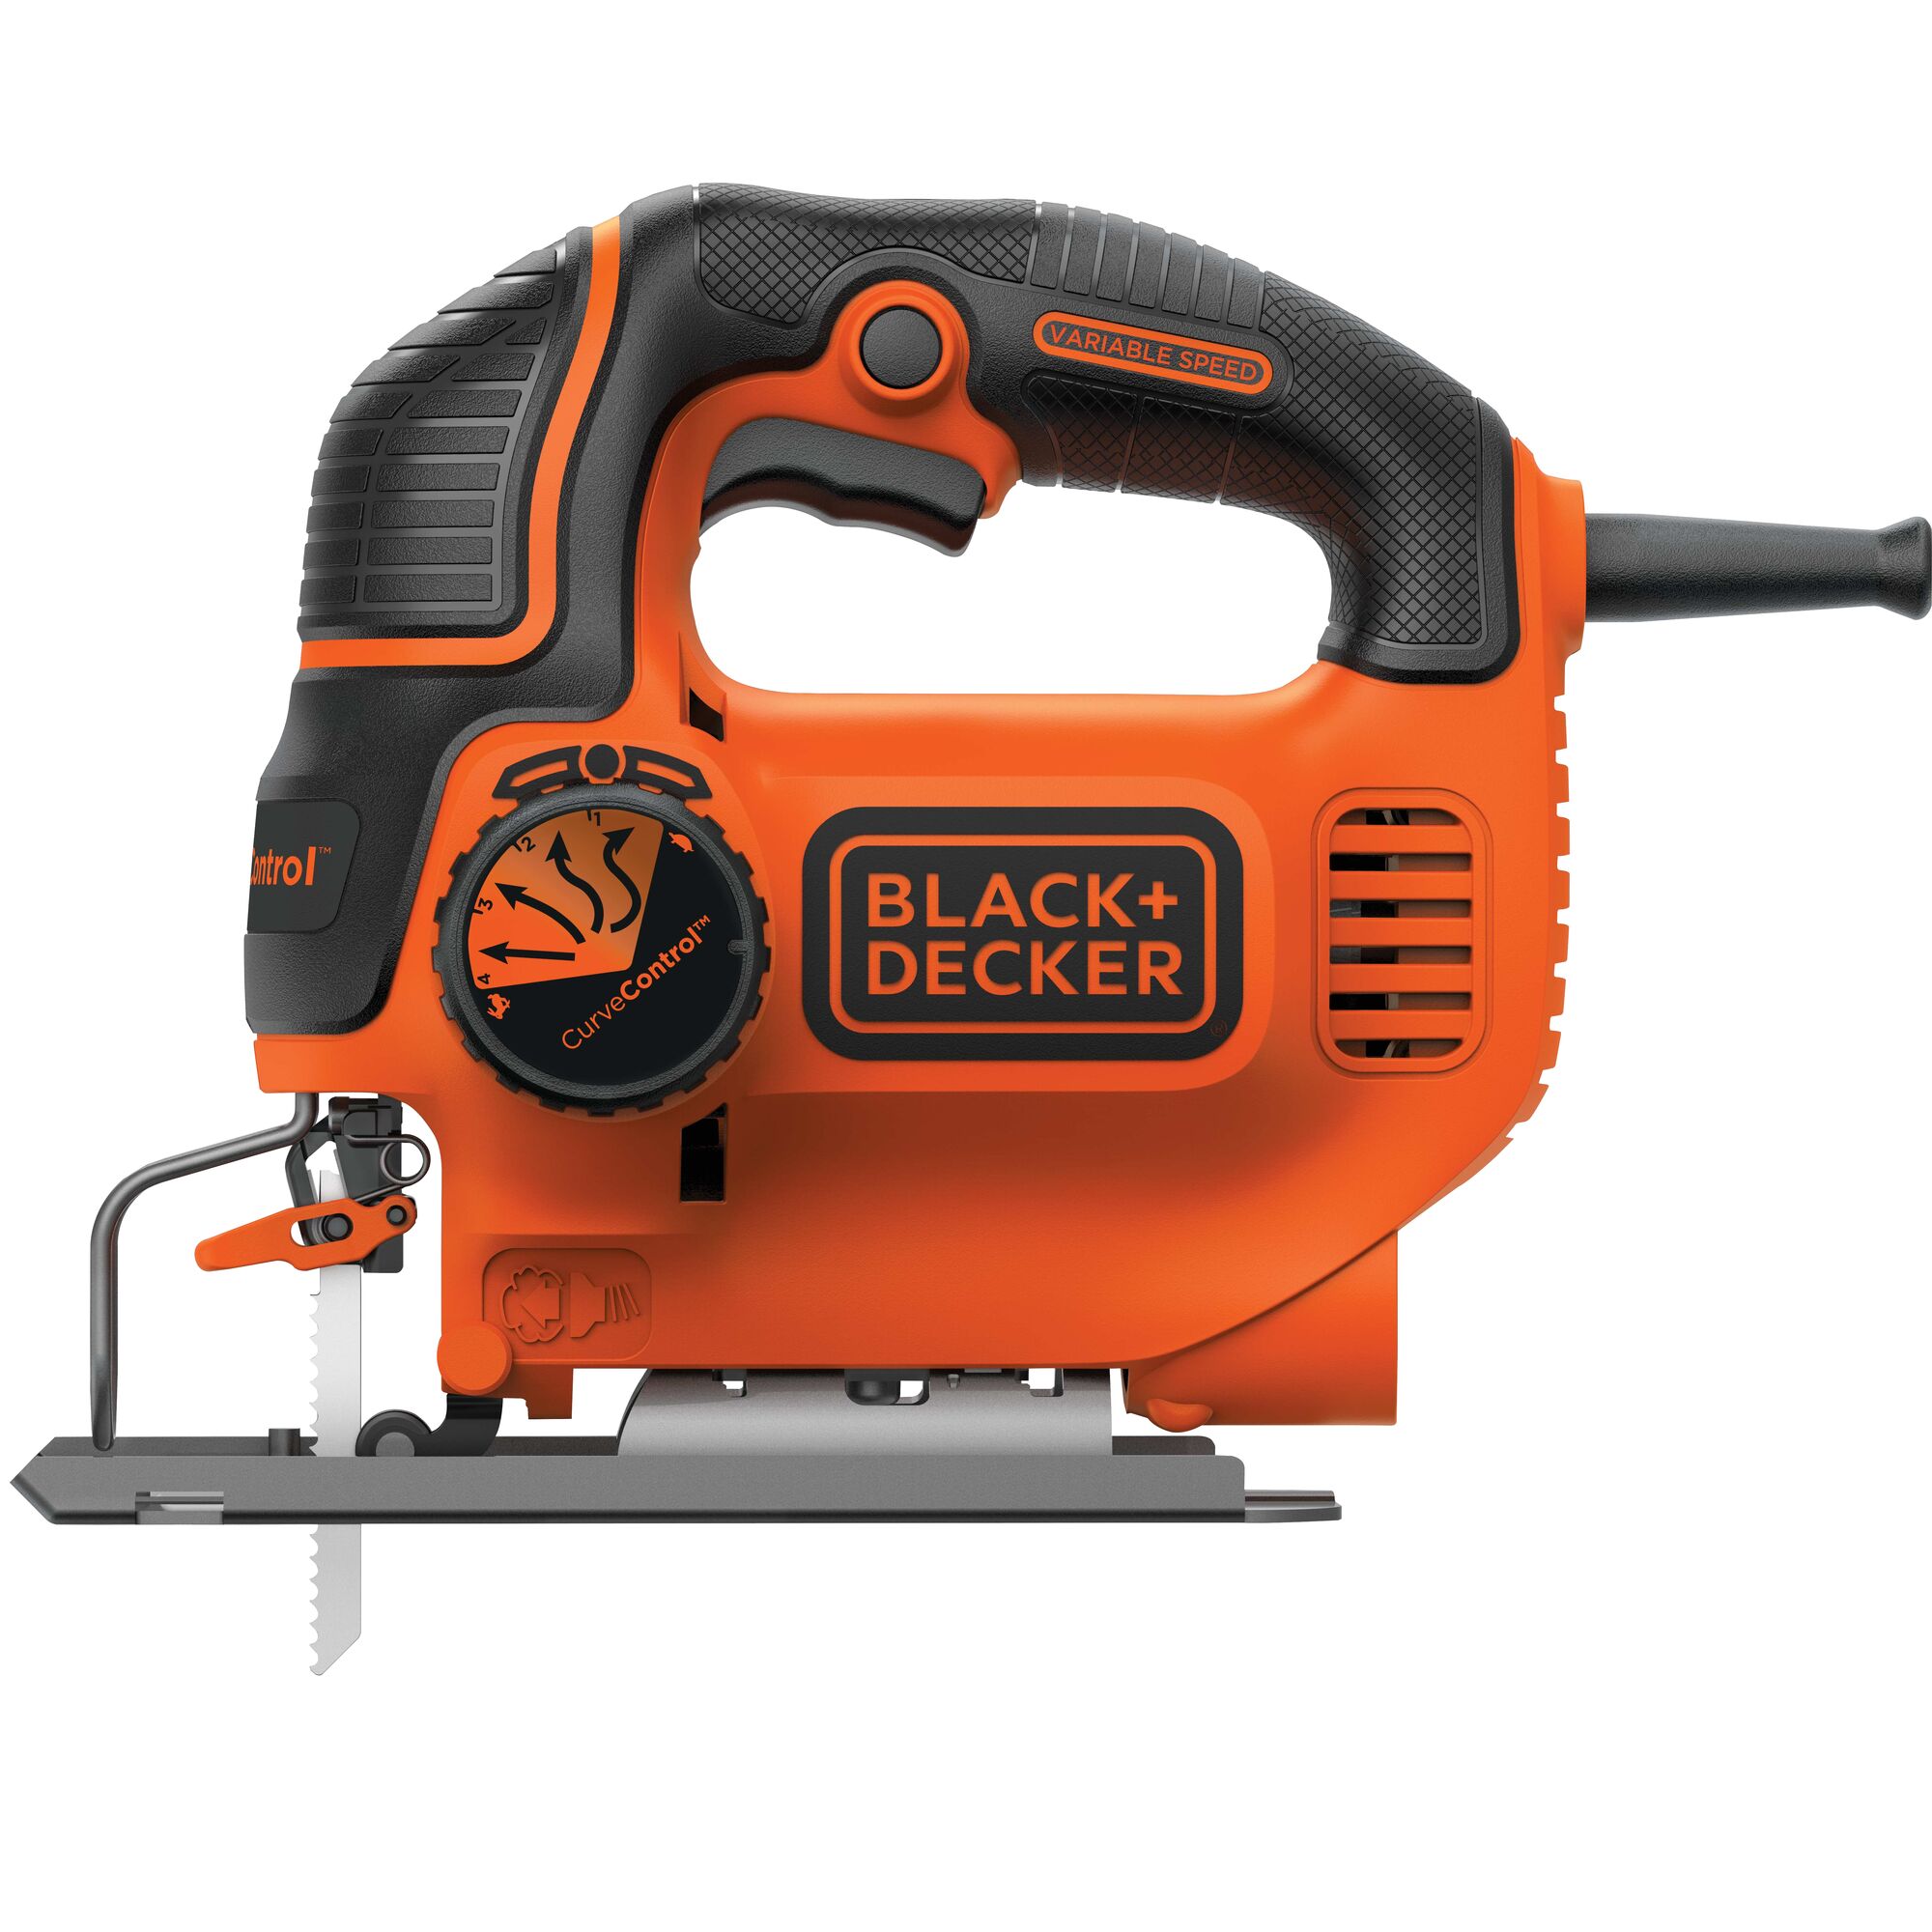 Black and decker jig saw smart select